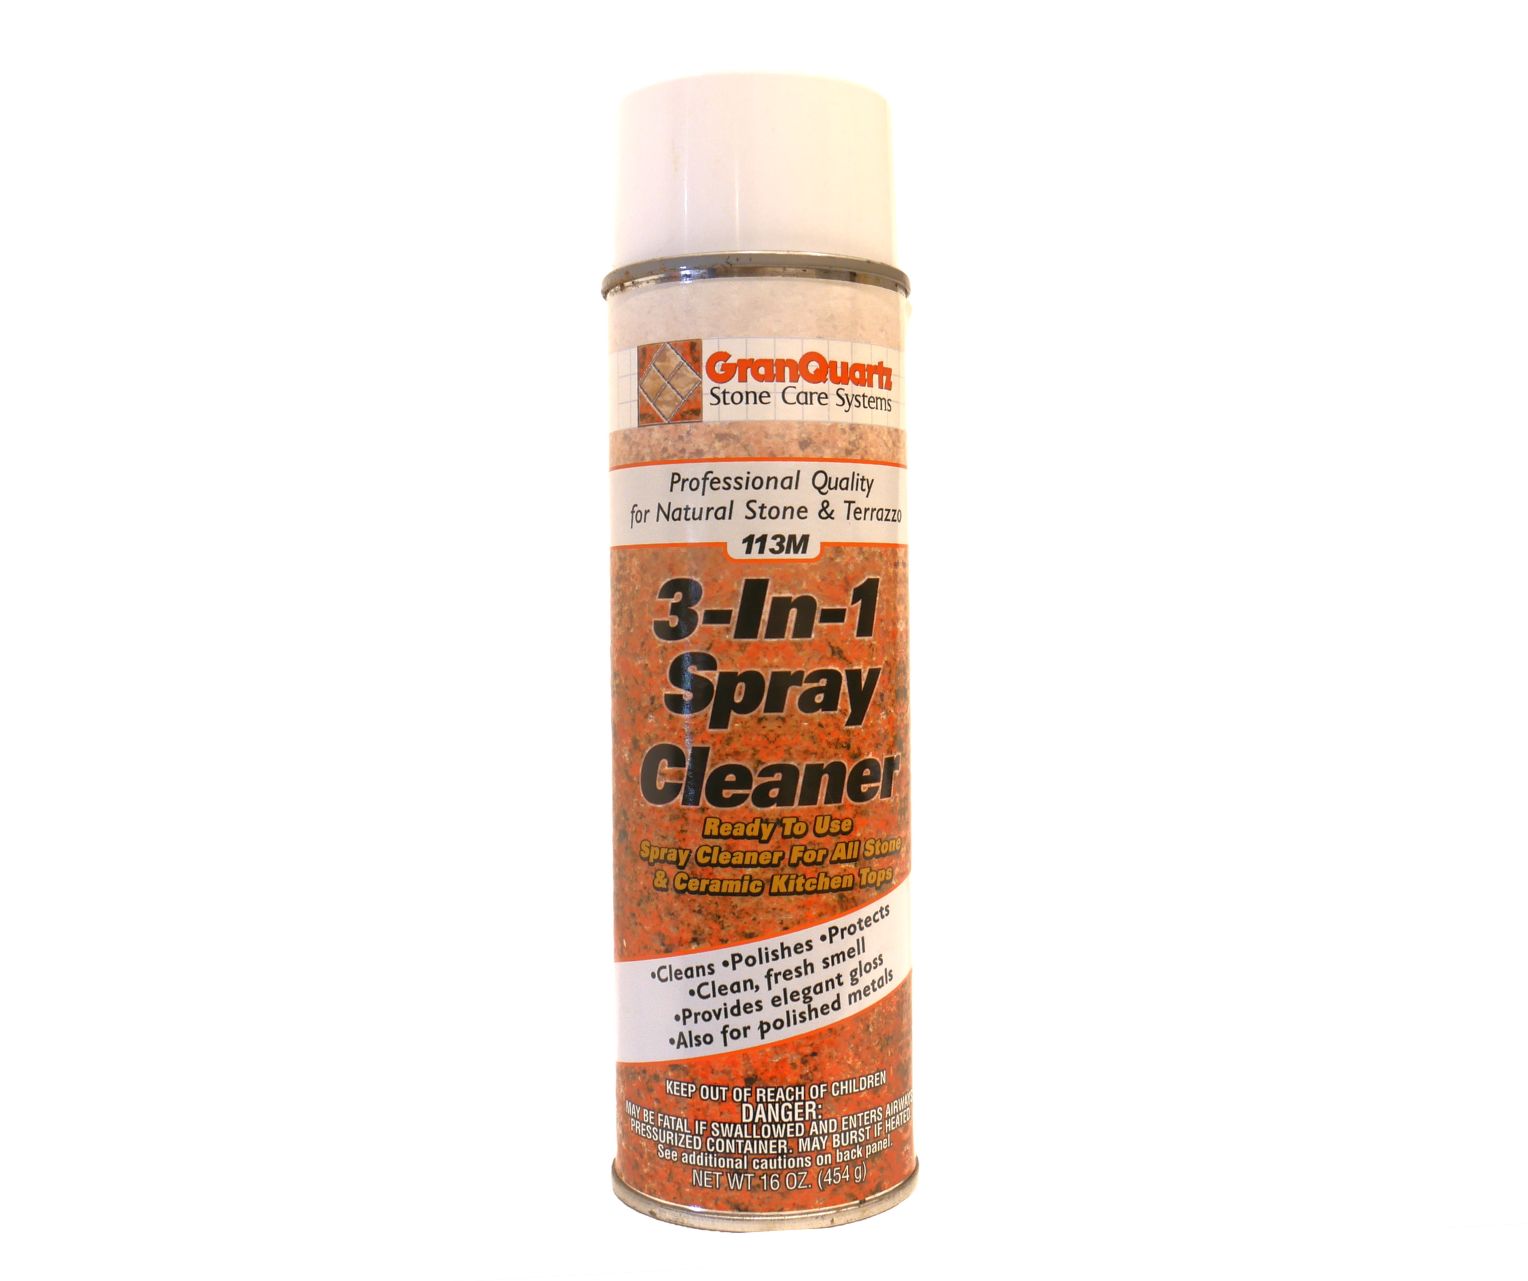 3-in-1 spray cleaner